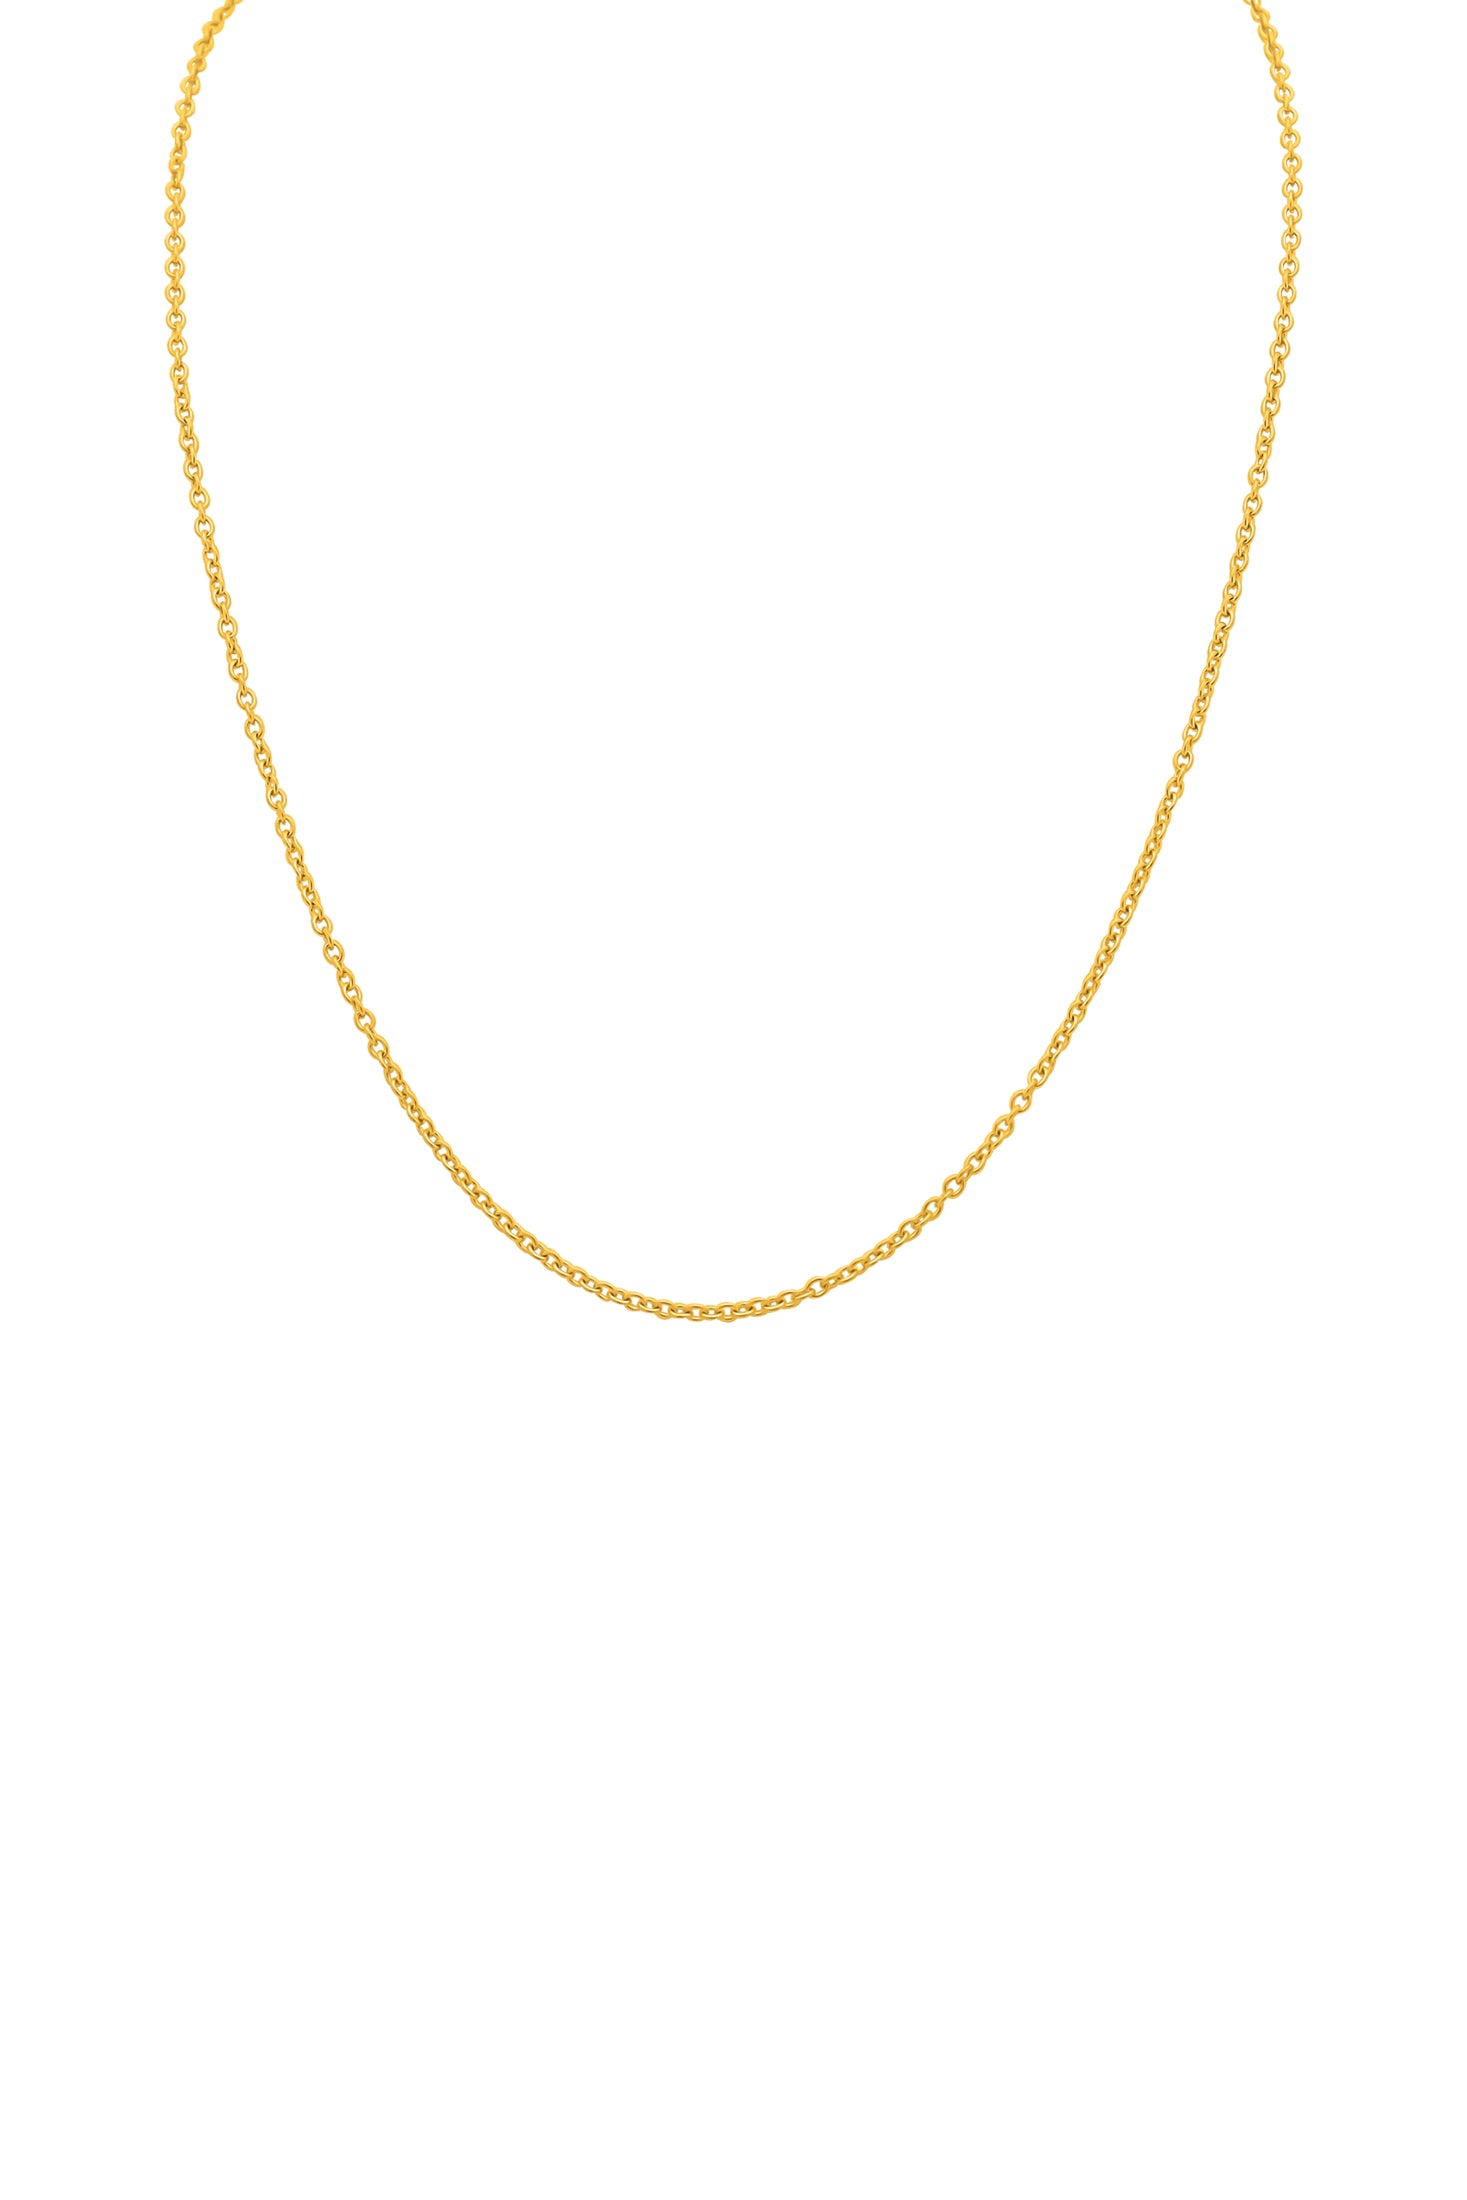 Chain Necklace with Adjustable Toggle